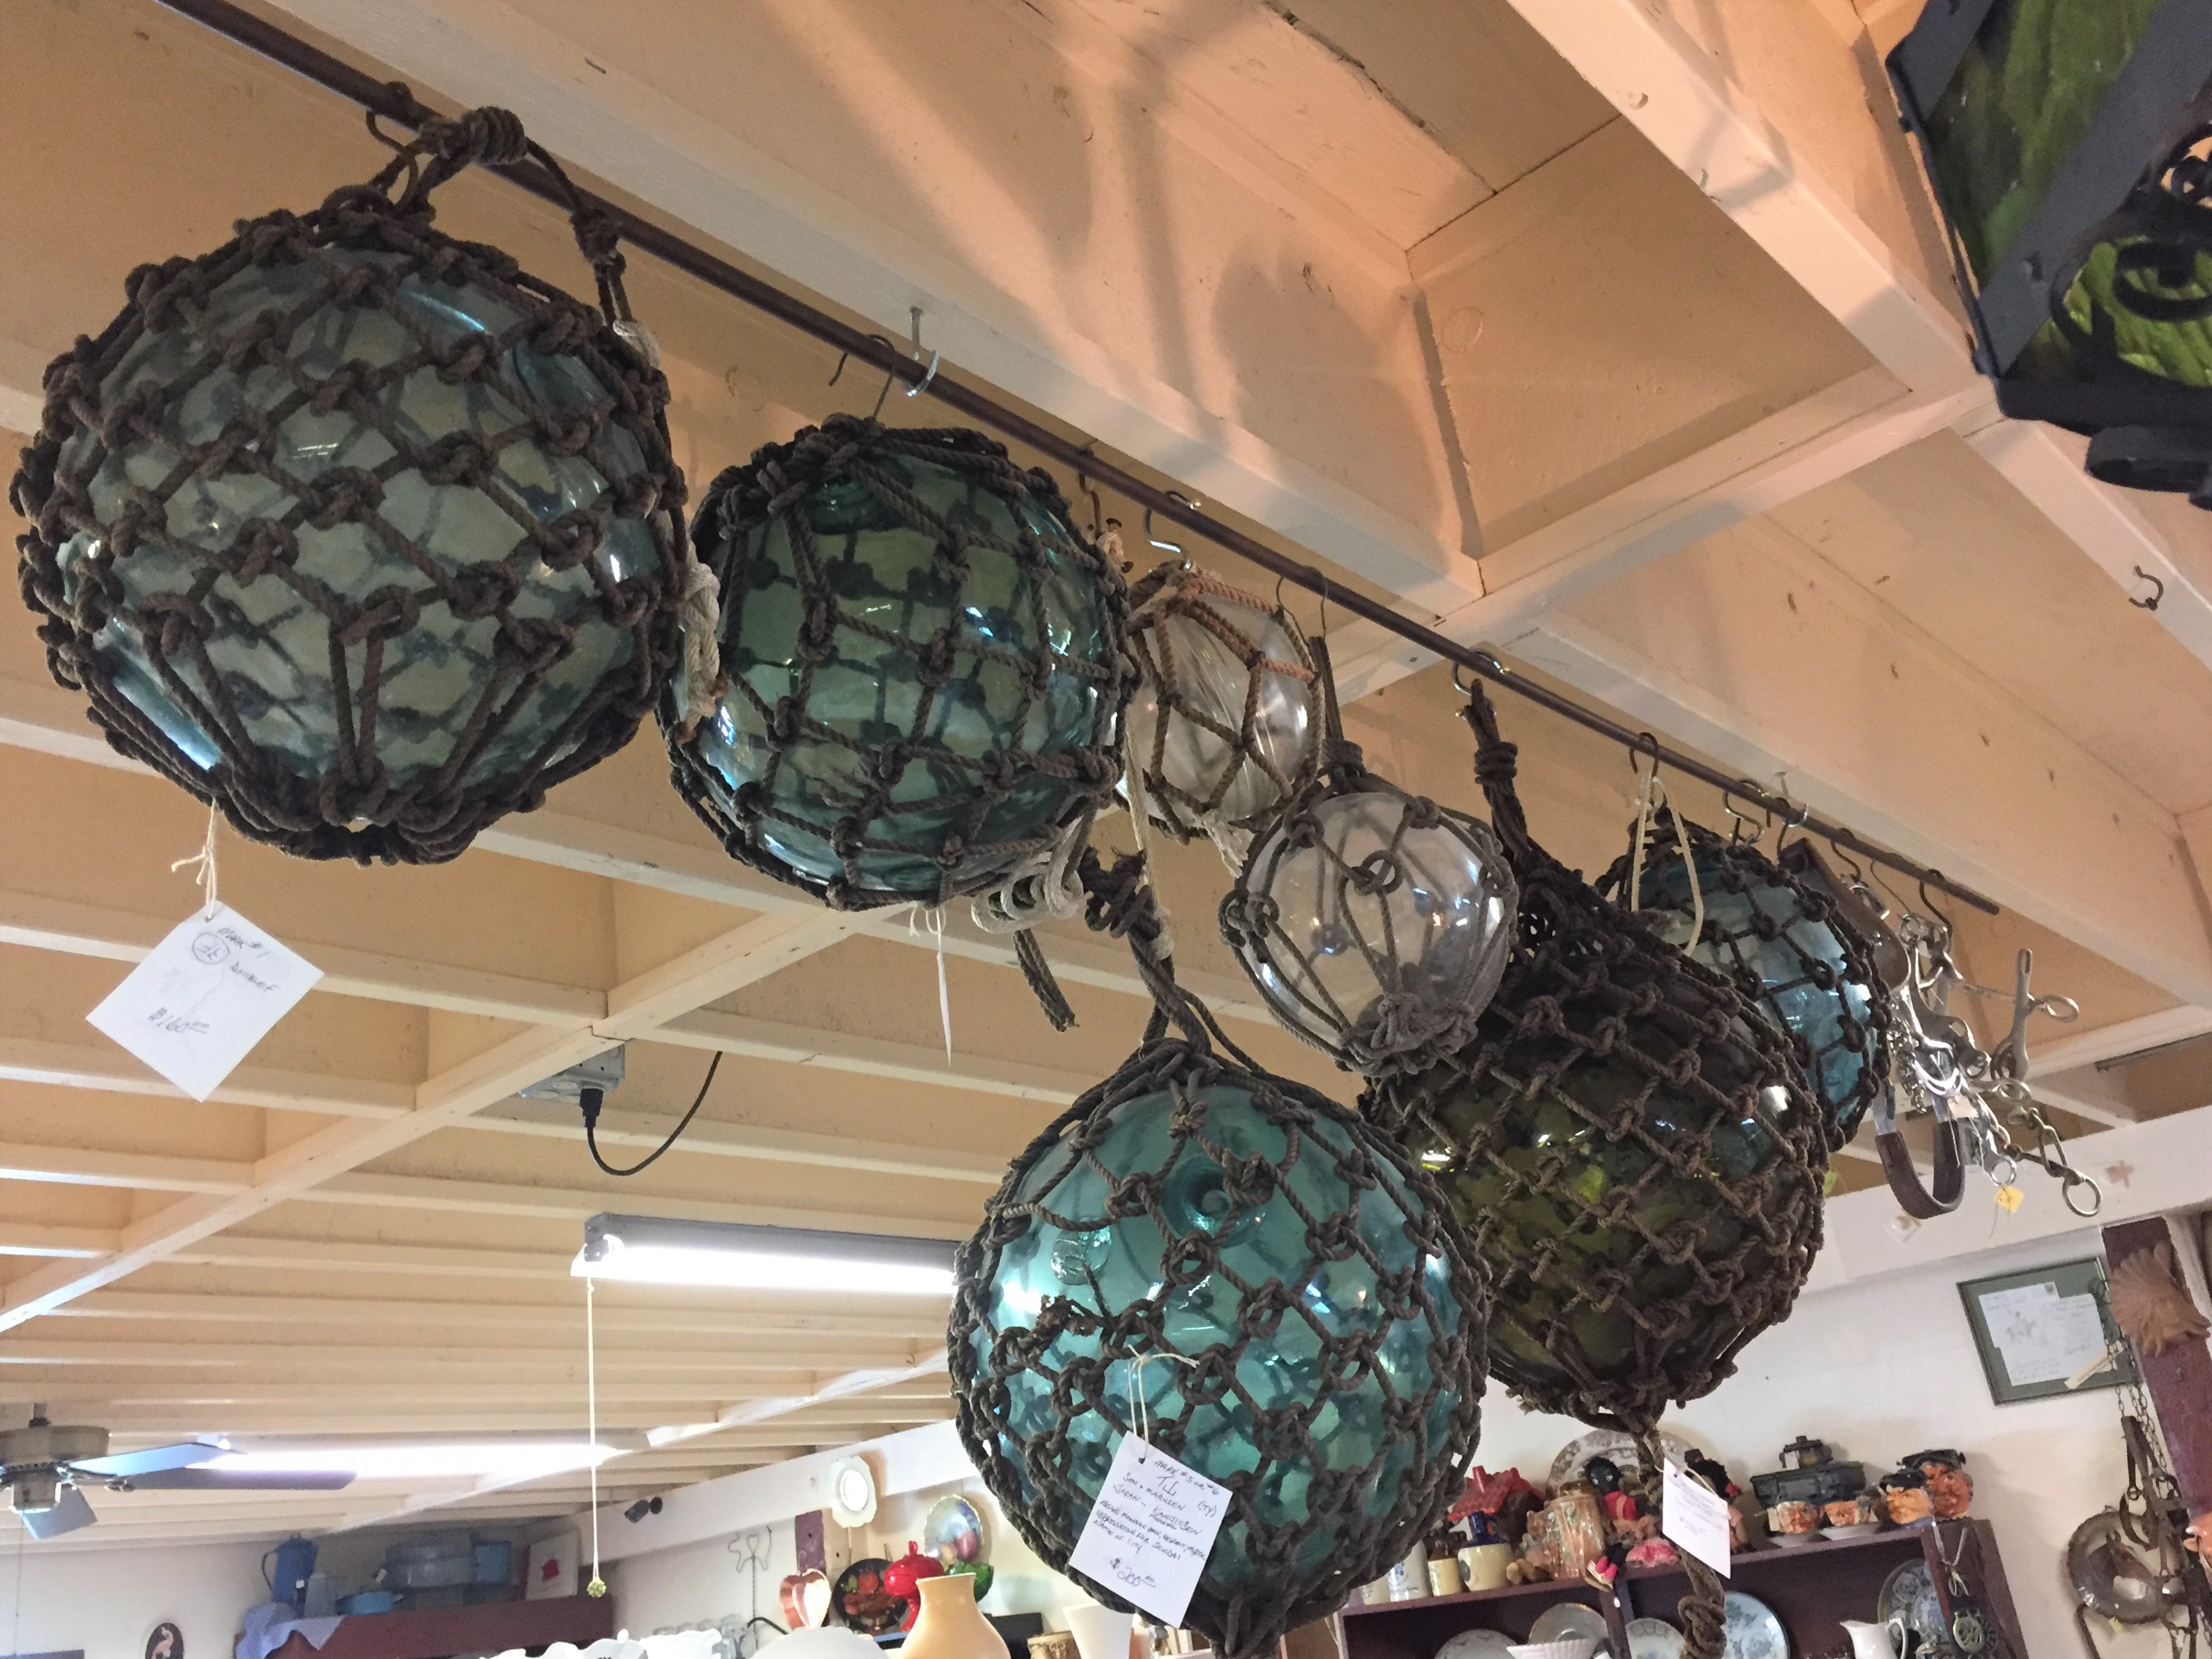 Glass Ball Fishing Floats - Fabulous Collection! - Parkway Drive Antiques